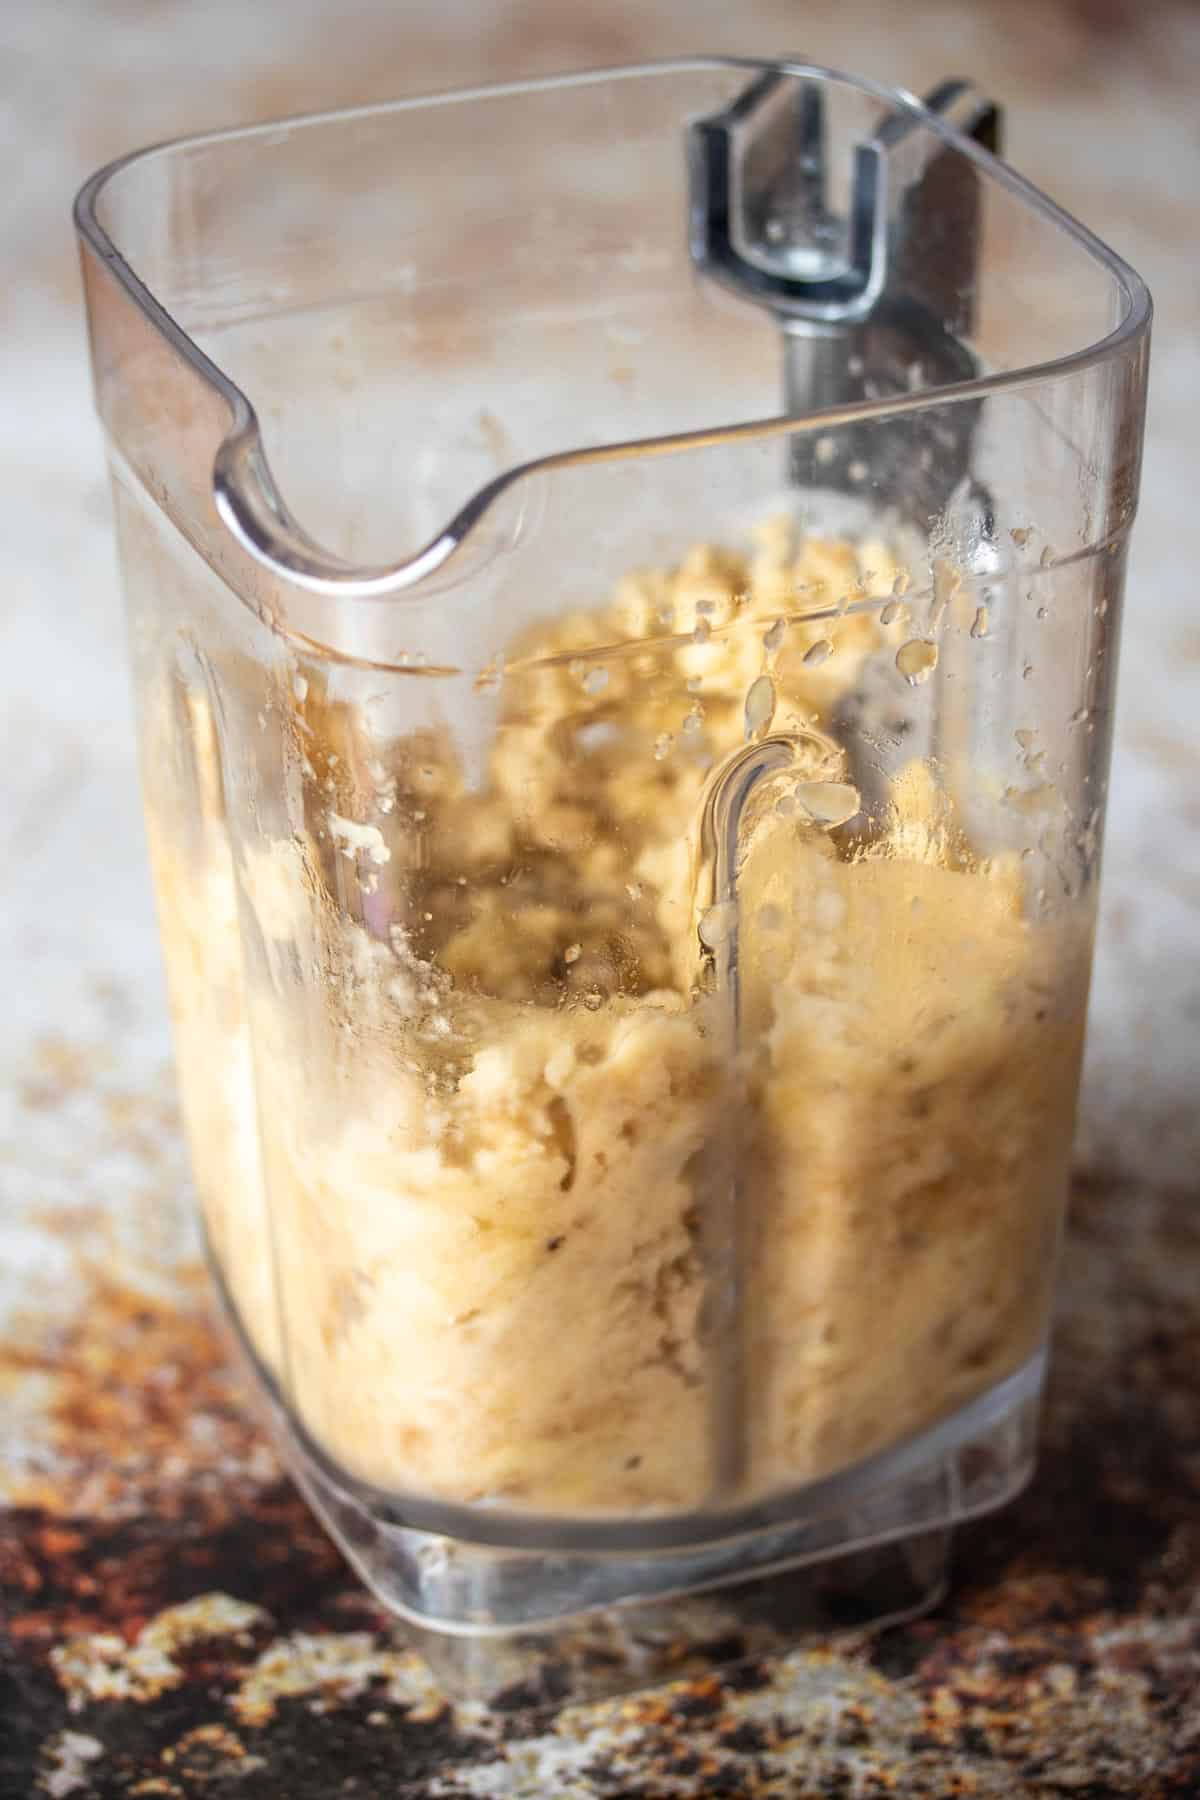 A blender with pulsed frozen bananas inside it sitting on a brown and white surface.